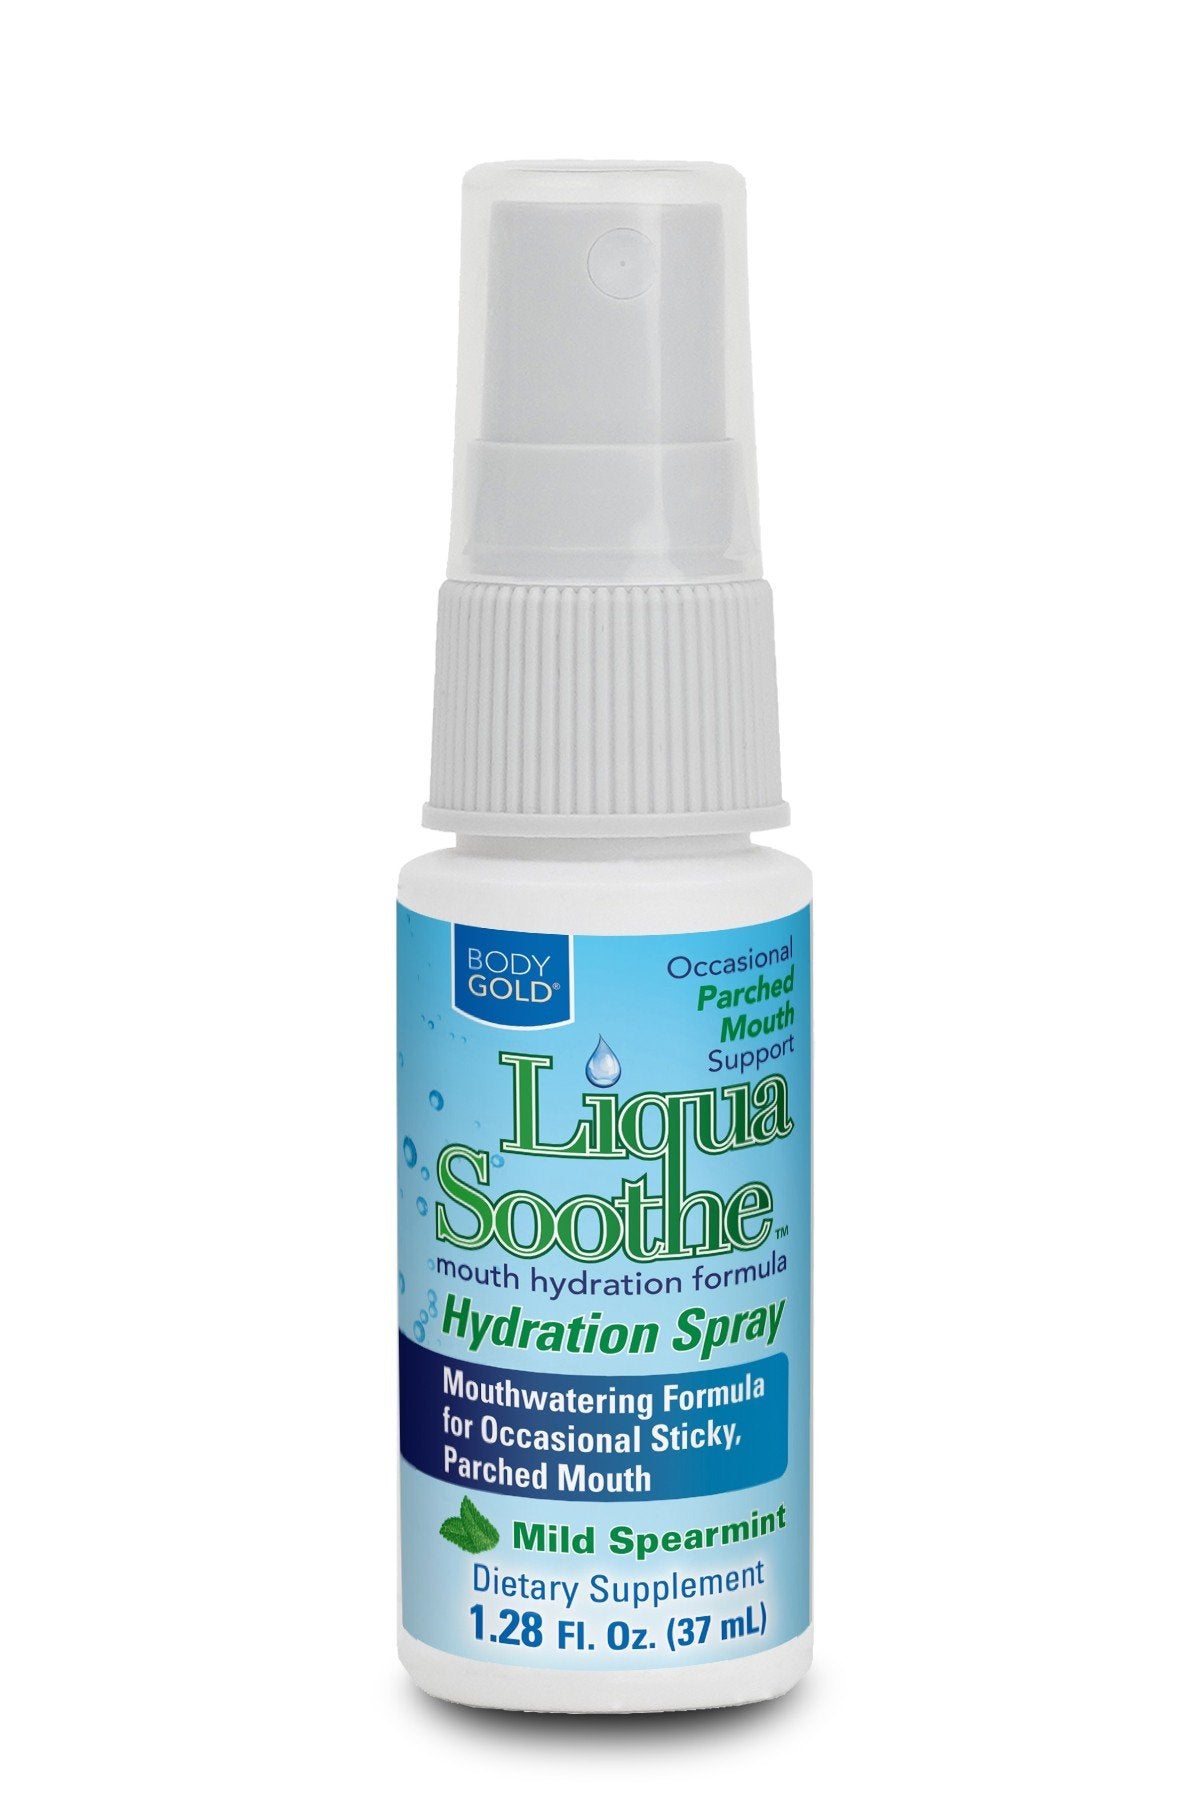 Body Gold Liqua-Soothe Parched Mouth Soothe 1.28 oz Liquid